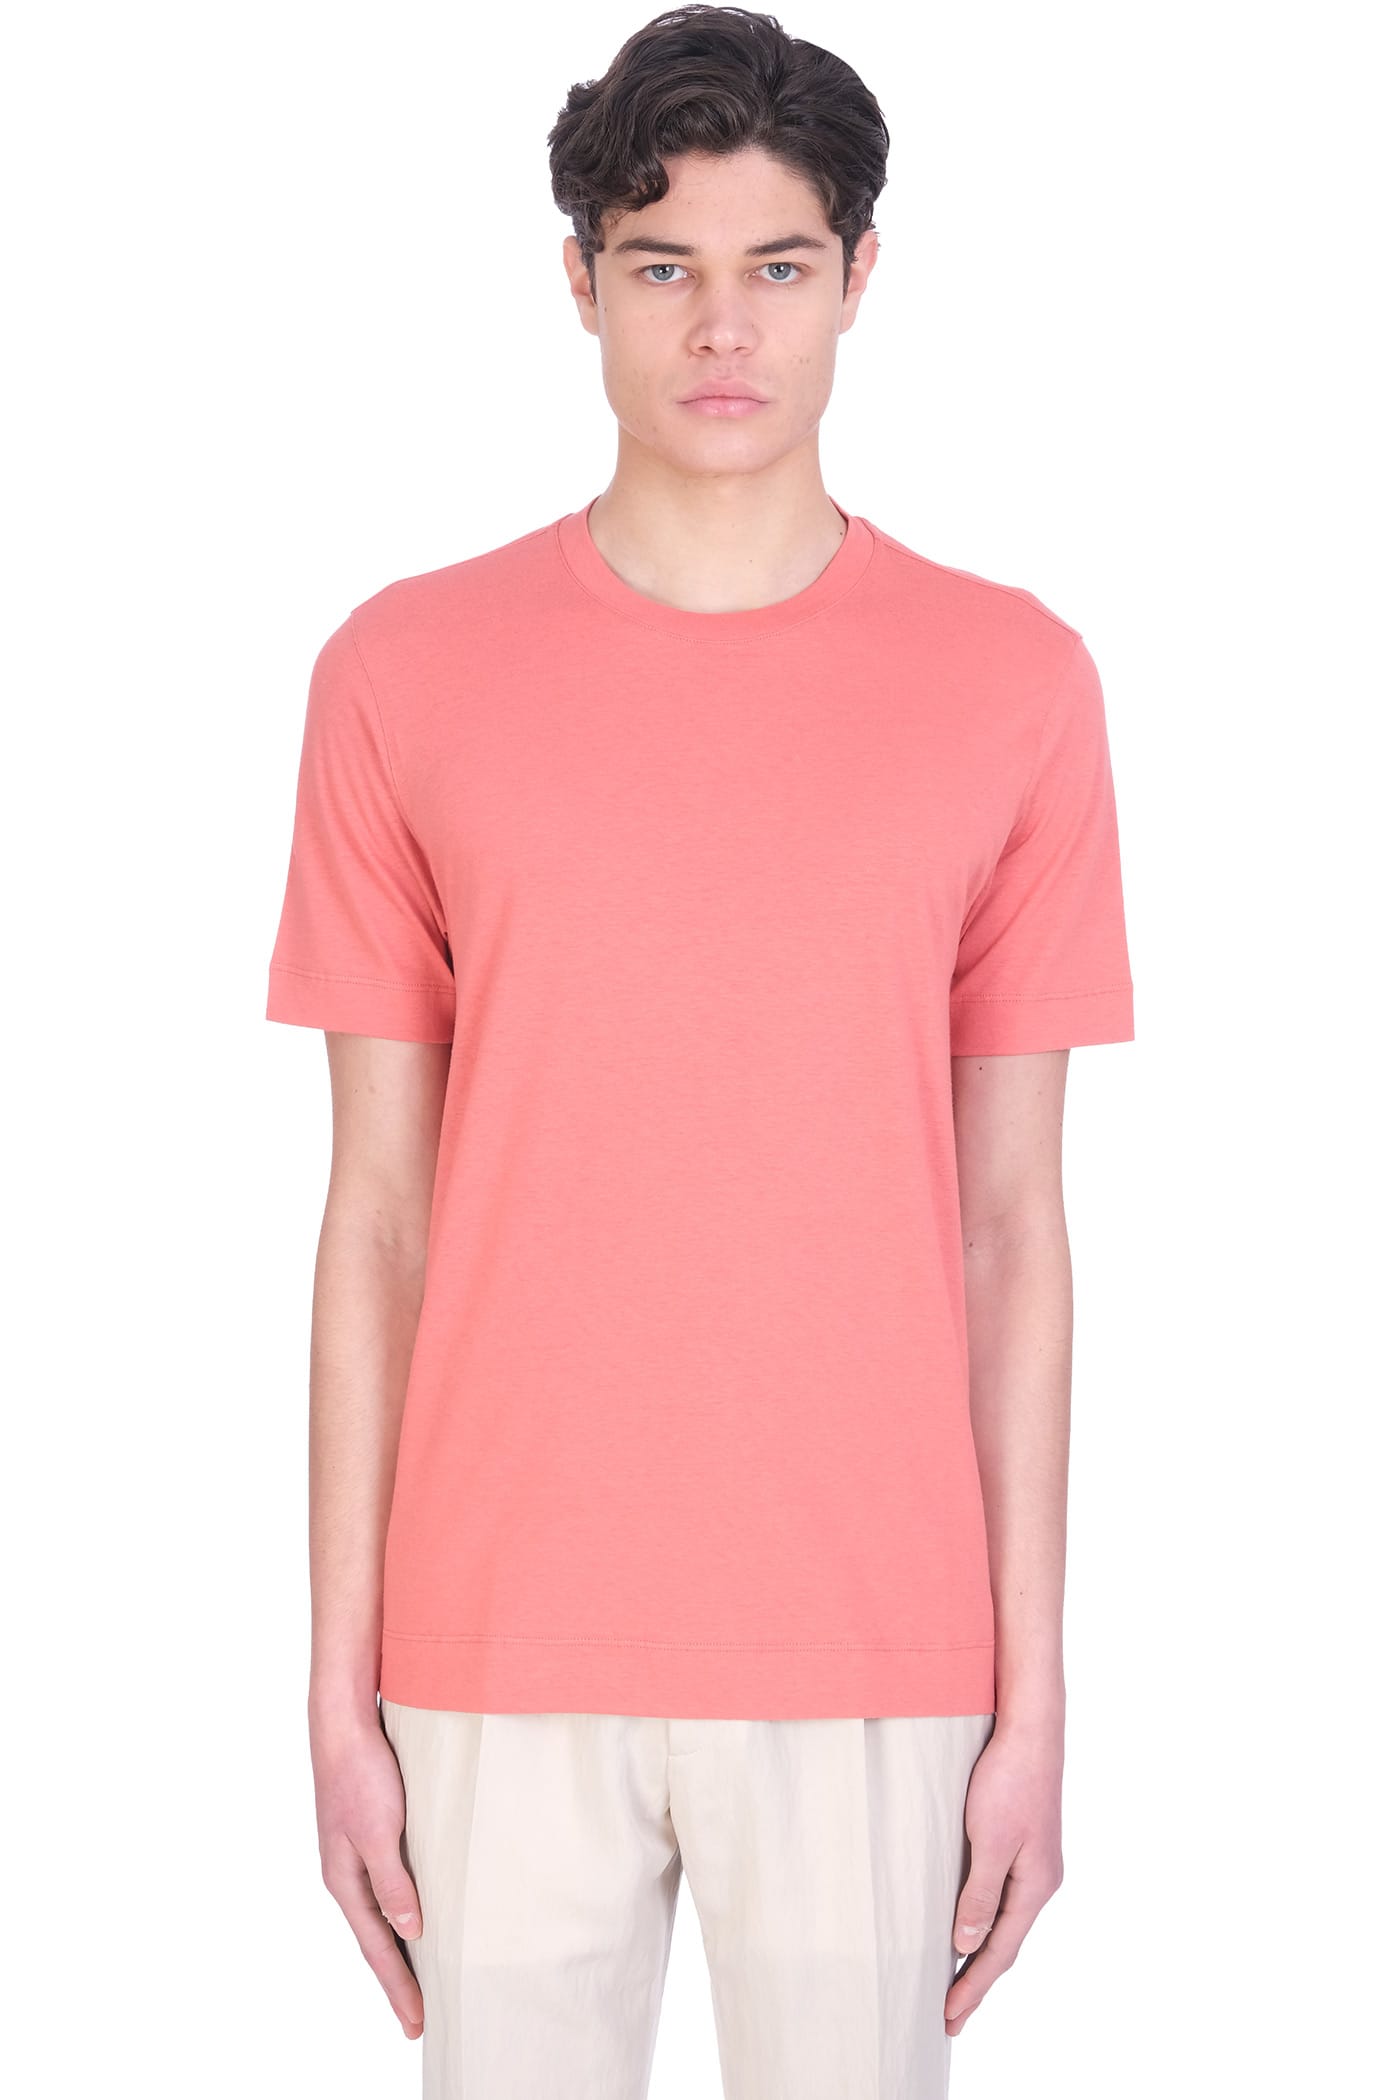 Z Zegna T-shirt In Red Cotton And Linen